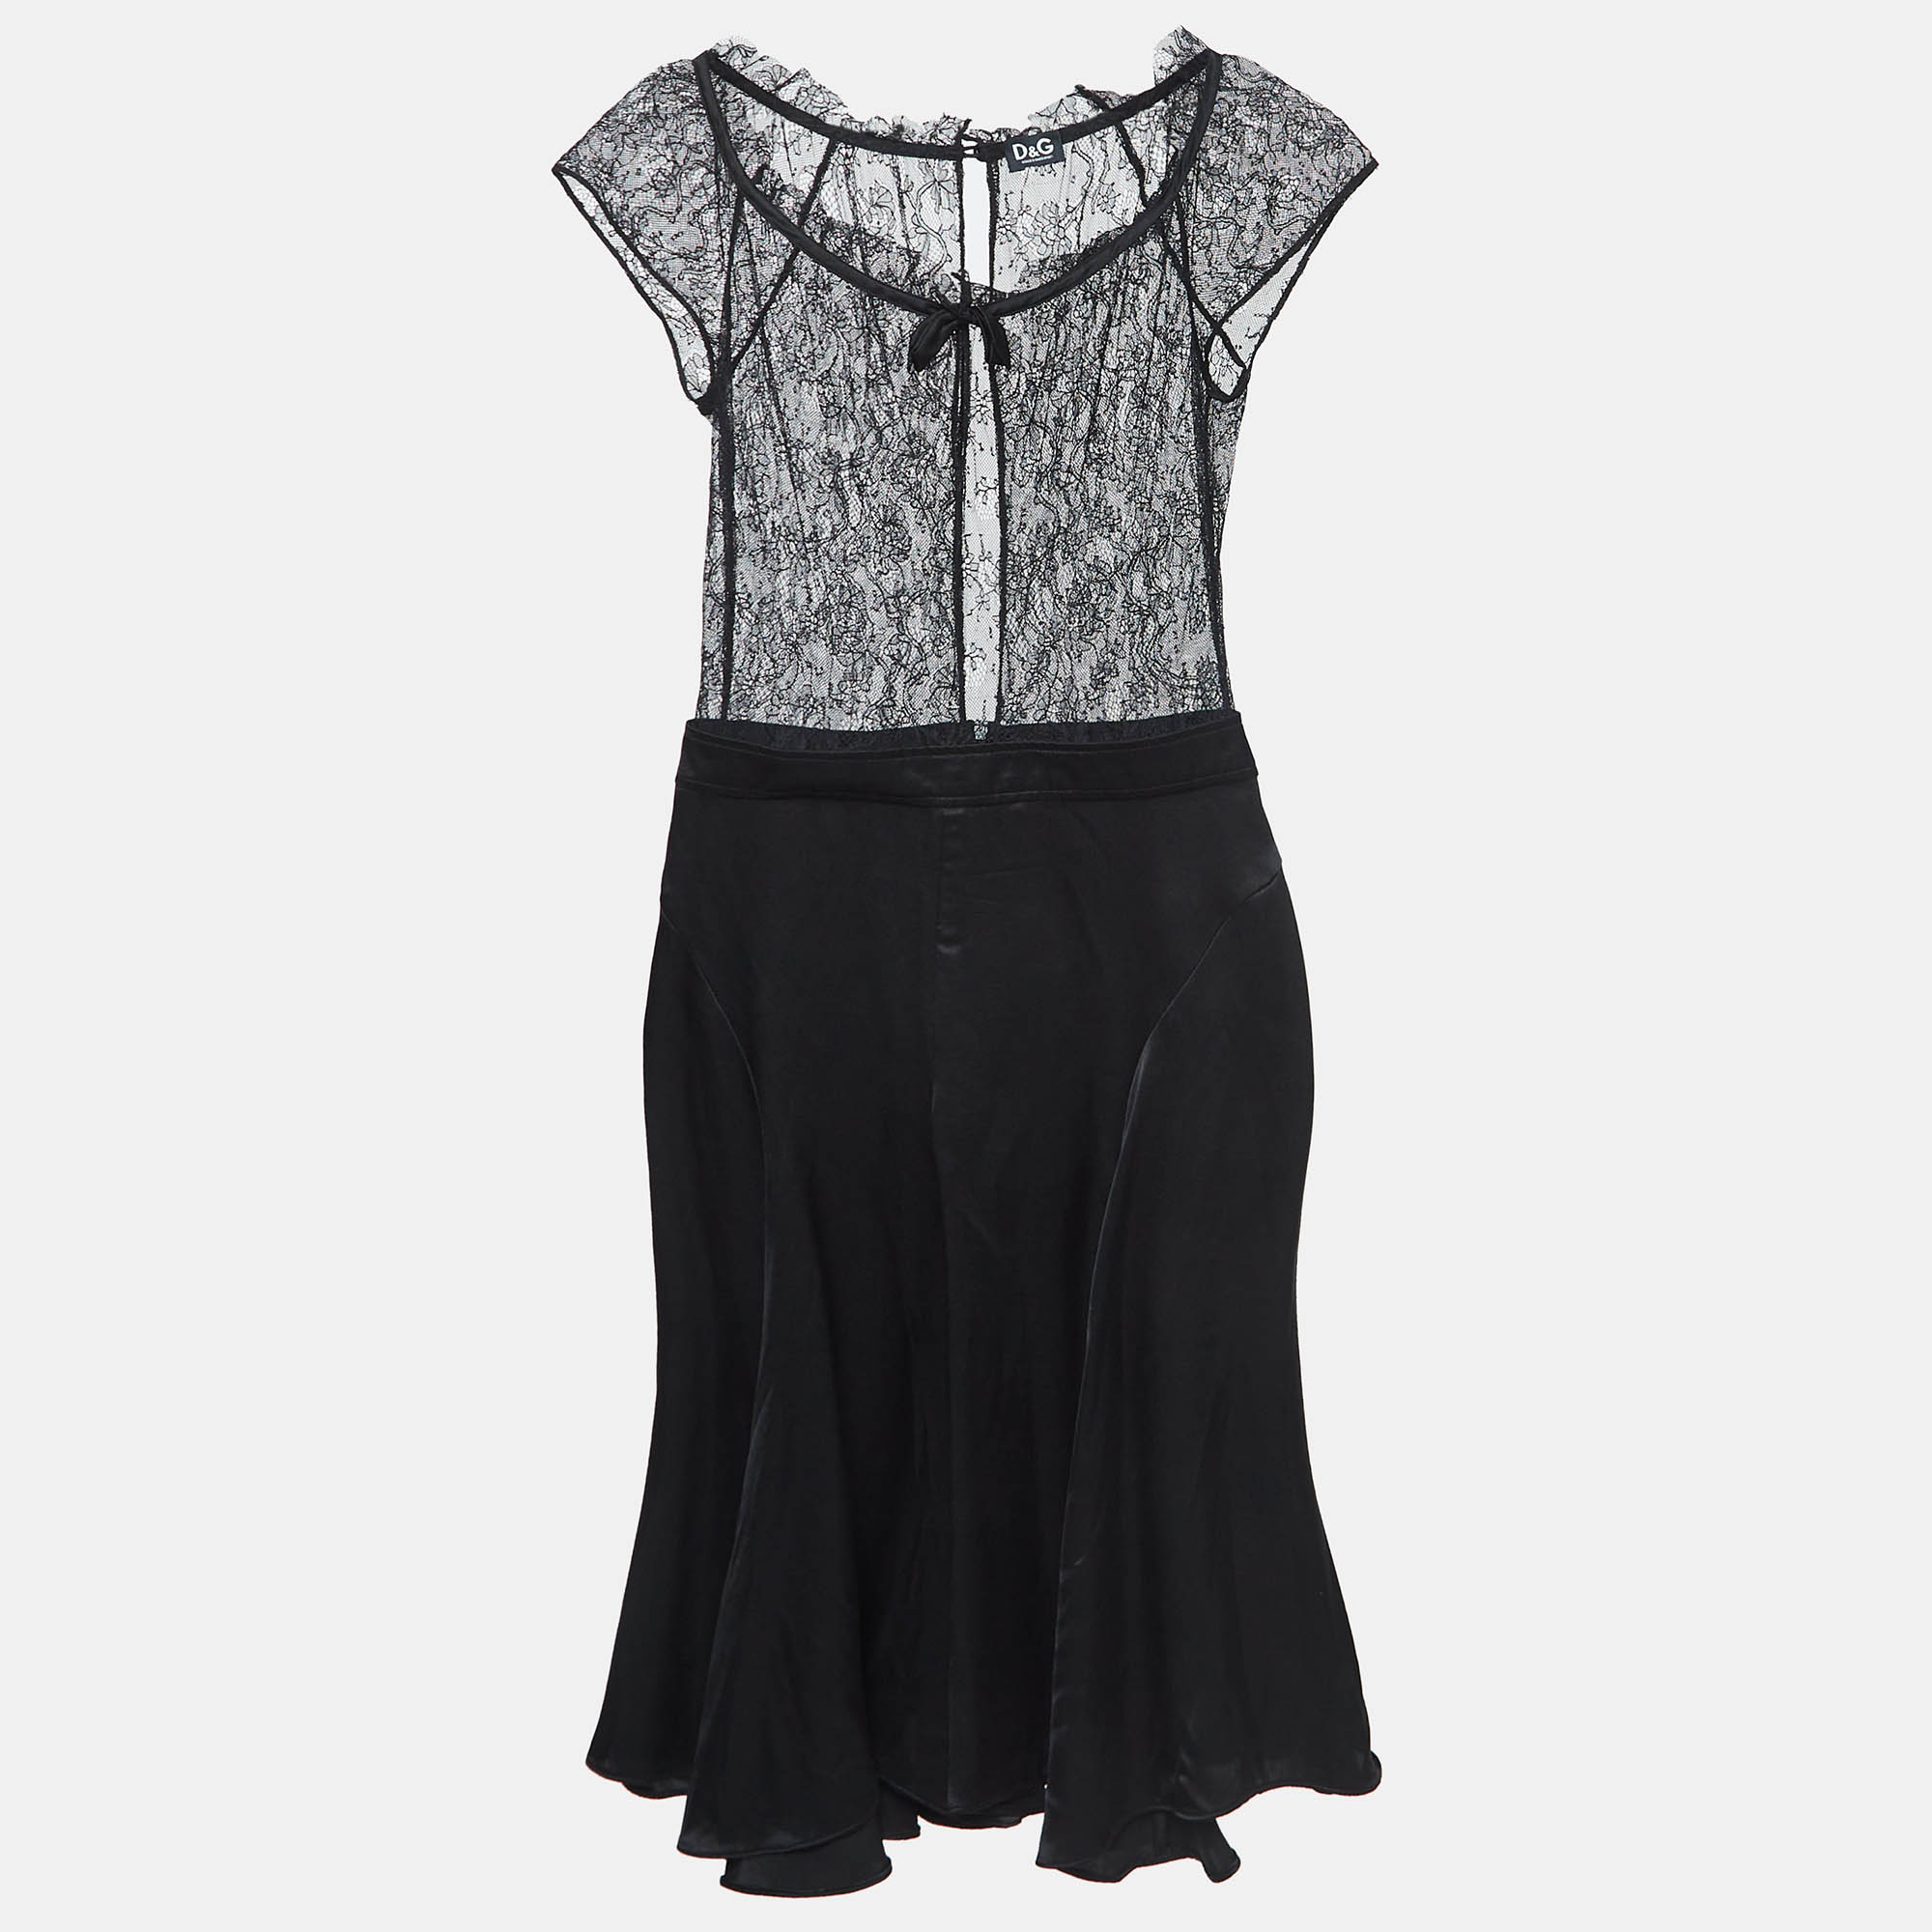 D&g black lace and satin flared short dress s